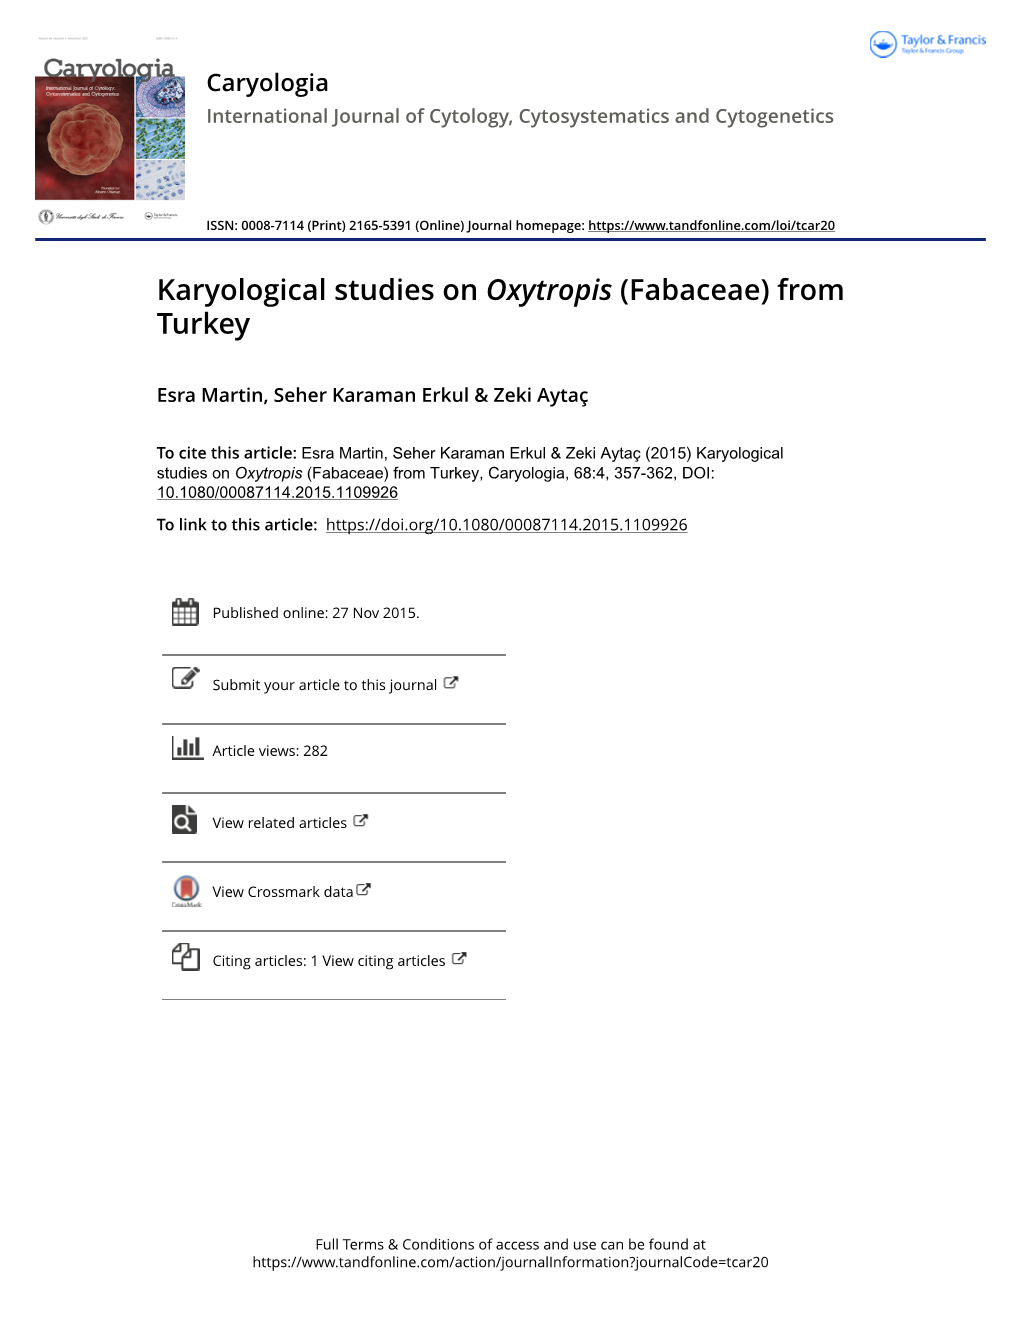 Karyological Studies on Oxytropis (Fabaceae) from Turkey